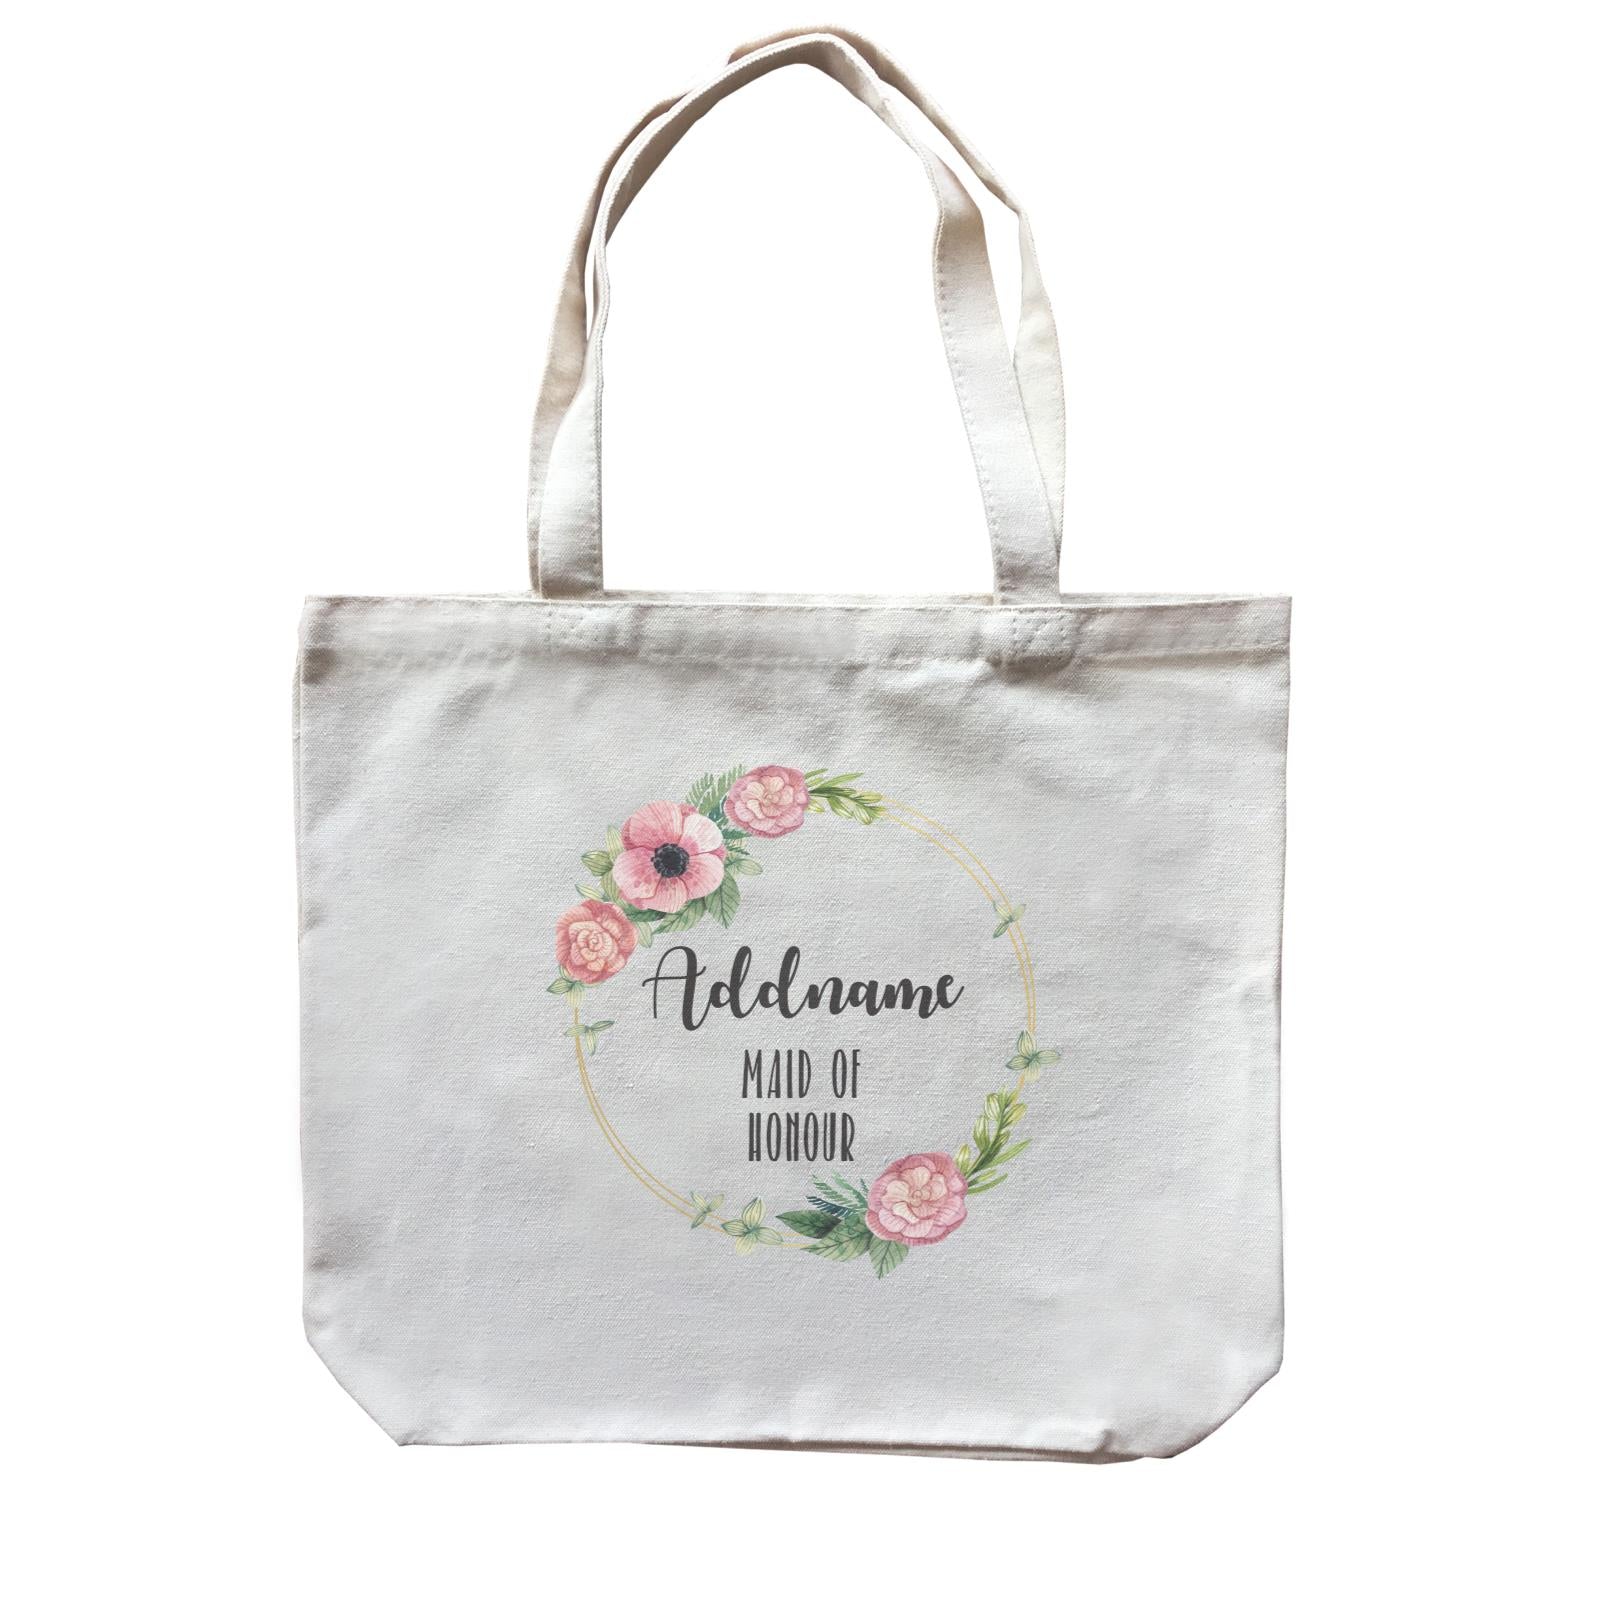 Bridesmaid Floral Sweet Pink Flower Wreath With Circle Maid Of Honour Addname Canvas Bag